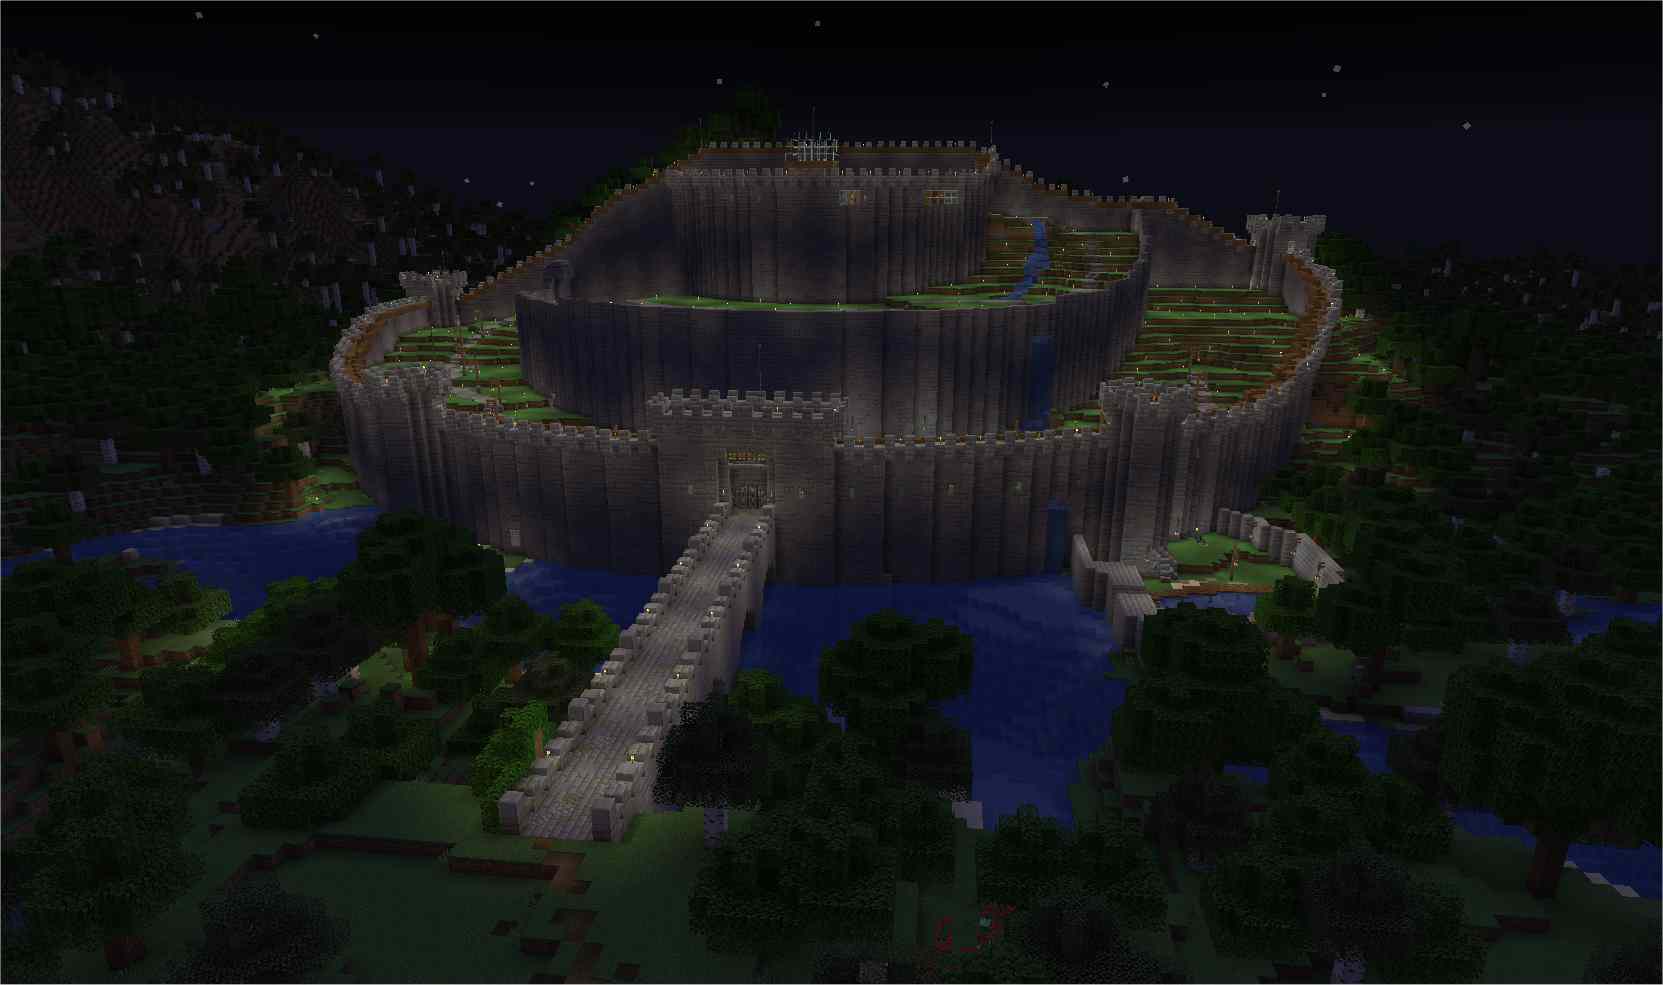 Minecraft player brings the Ender Dragon to the Overworld without